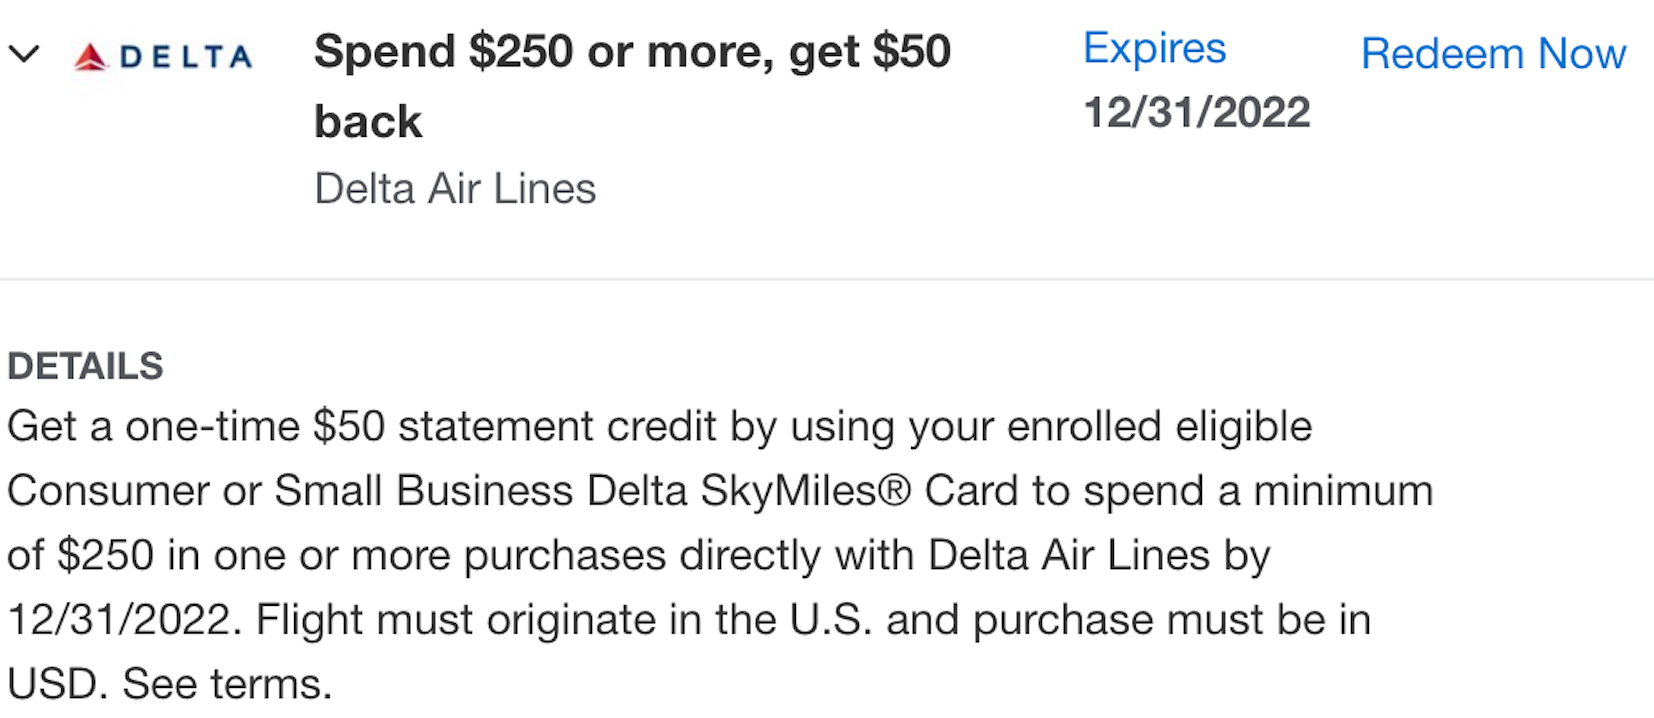 Save $50 off $250 on Delta